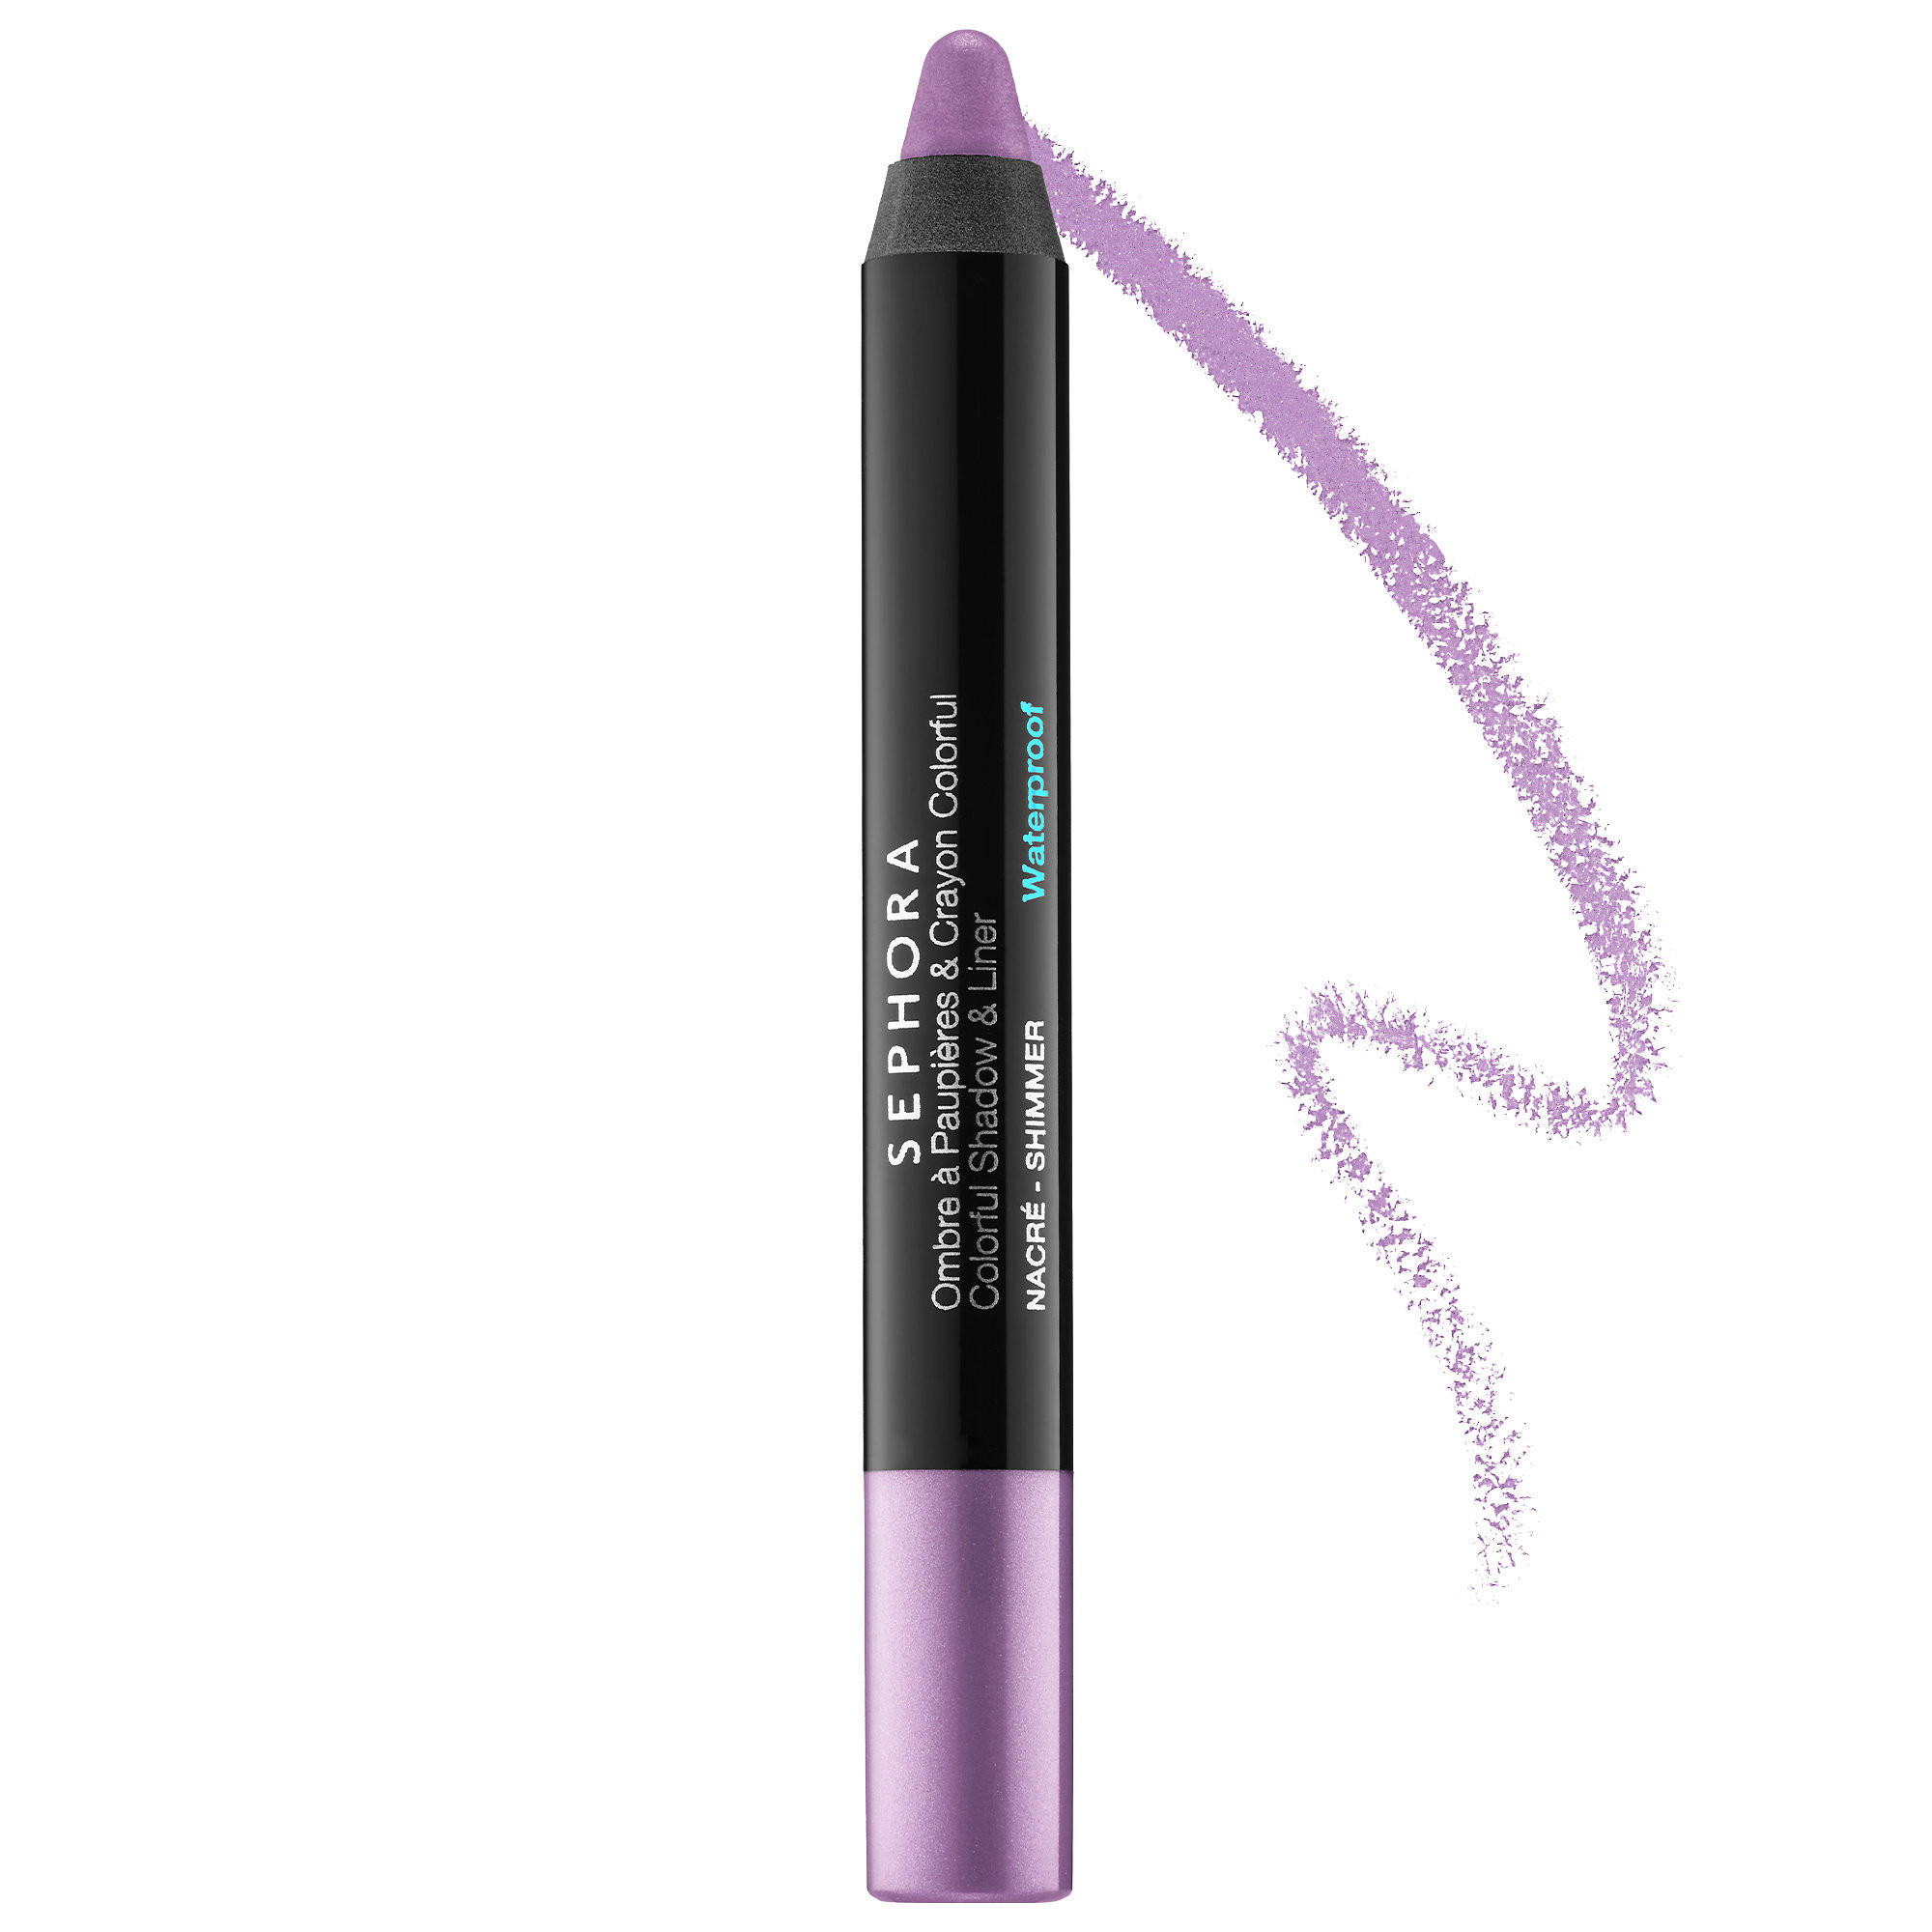 Sephora Colorful Shadow & Liner Lilac Shimmer 31